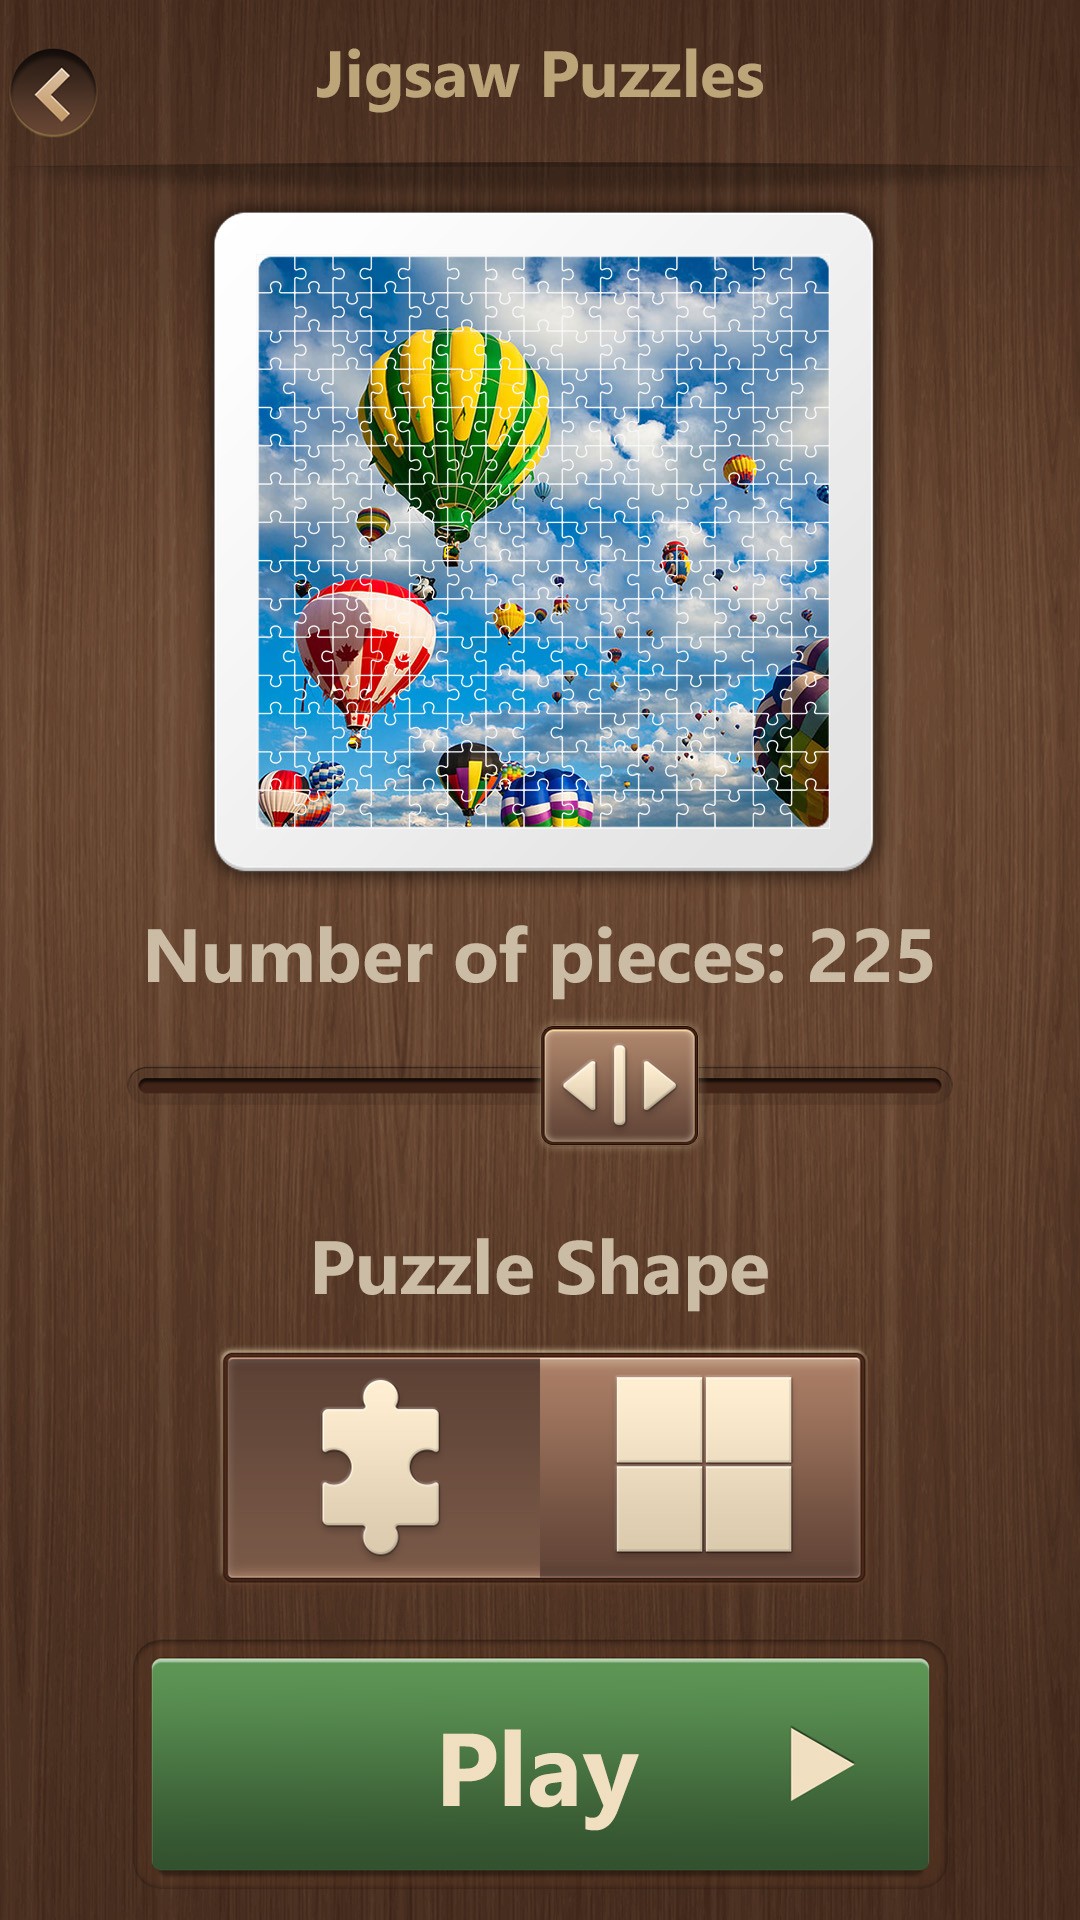 Real Jigsaw Puzzles